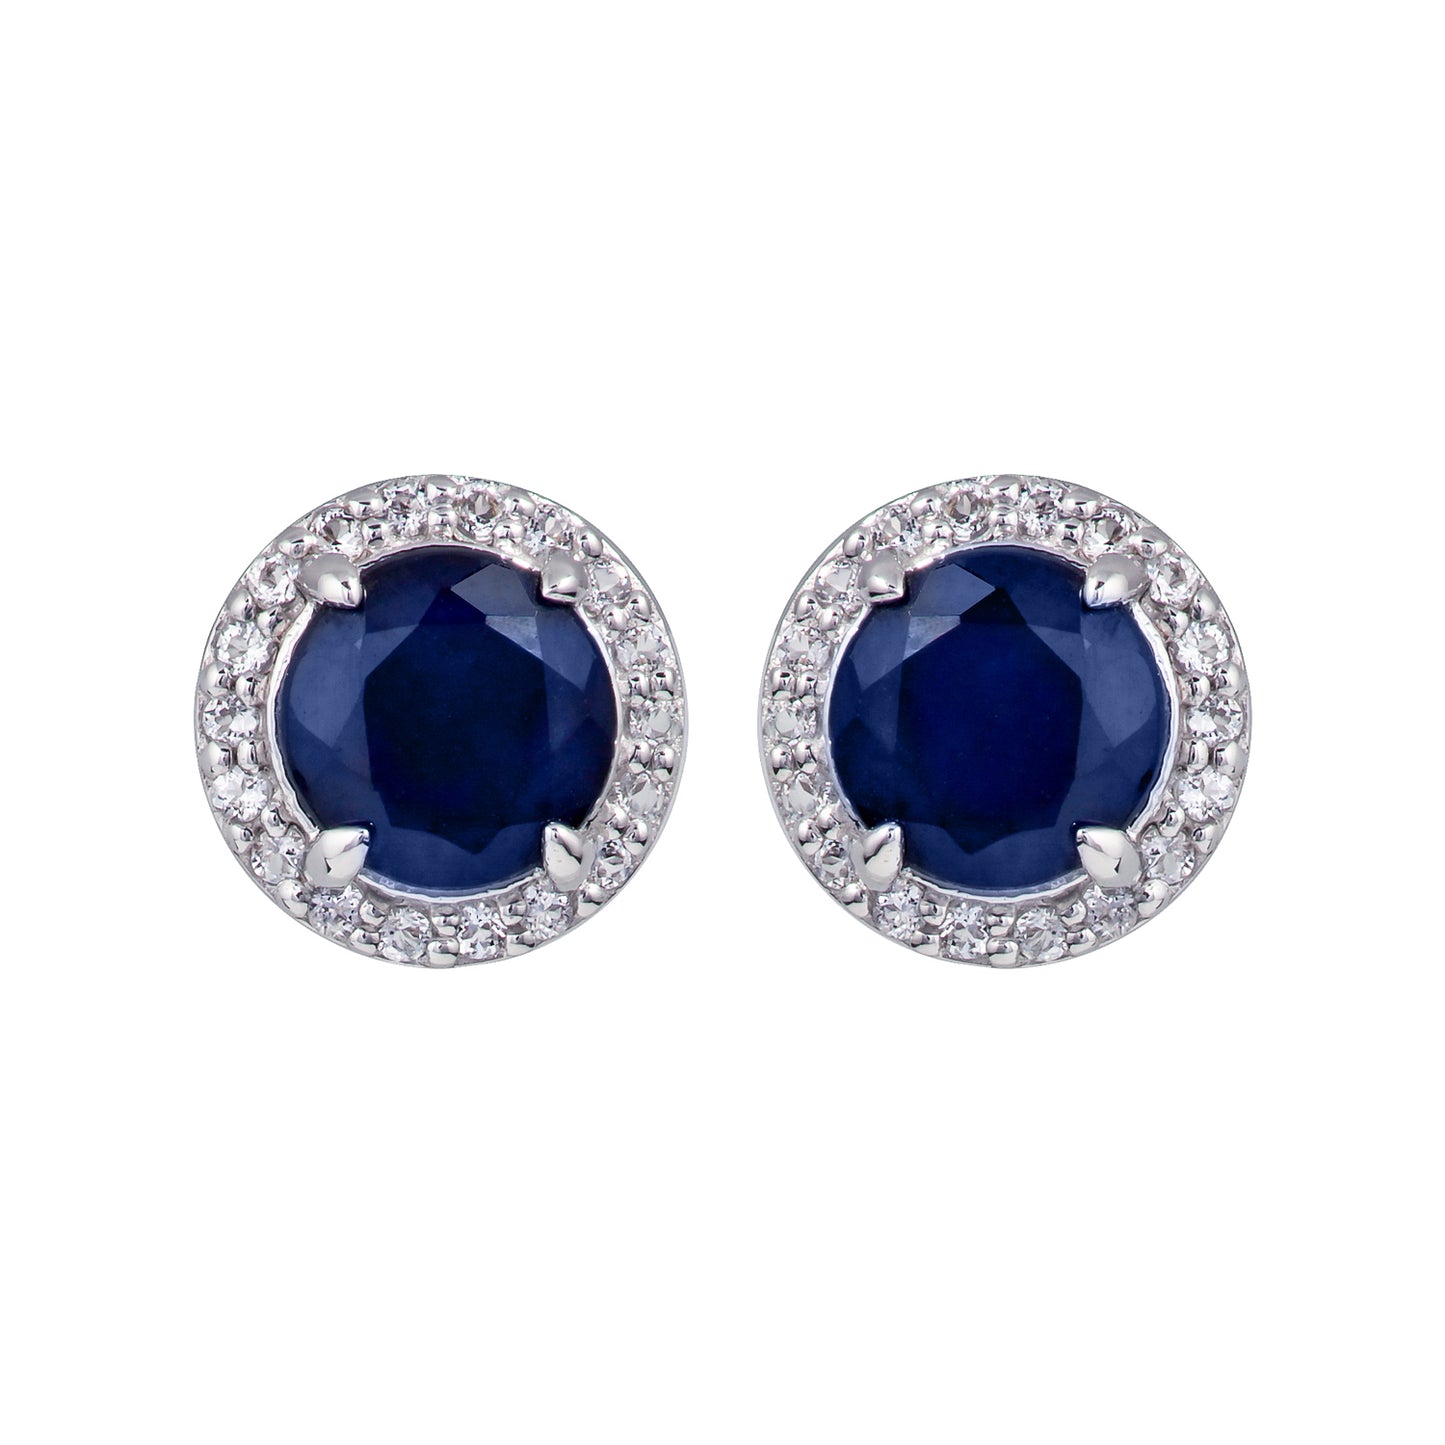 10k White Gold Genuine Round Sapphire and White Topaz Halo Earrings